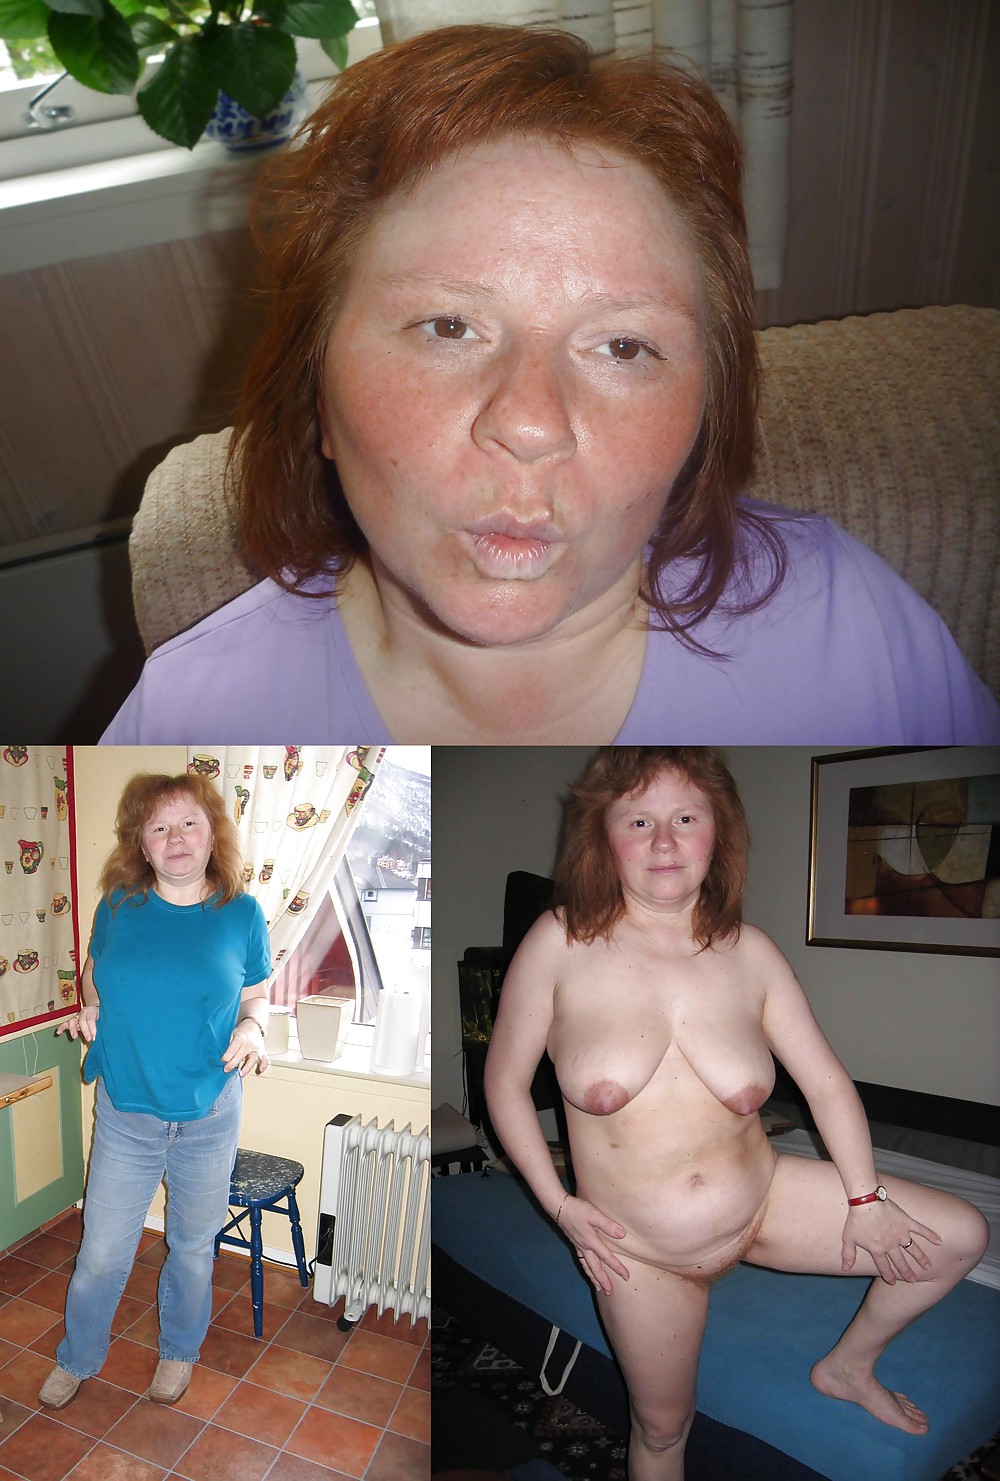 Fat Skinny Ugly Freaky Old Young Quirky-Part 10 porn pictures